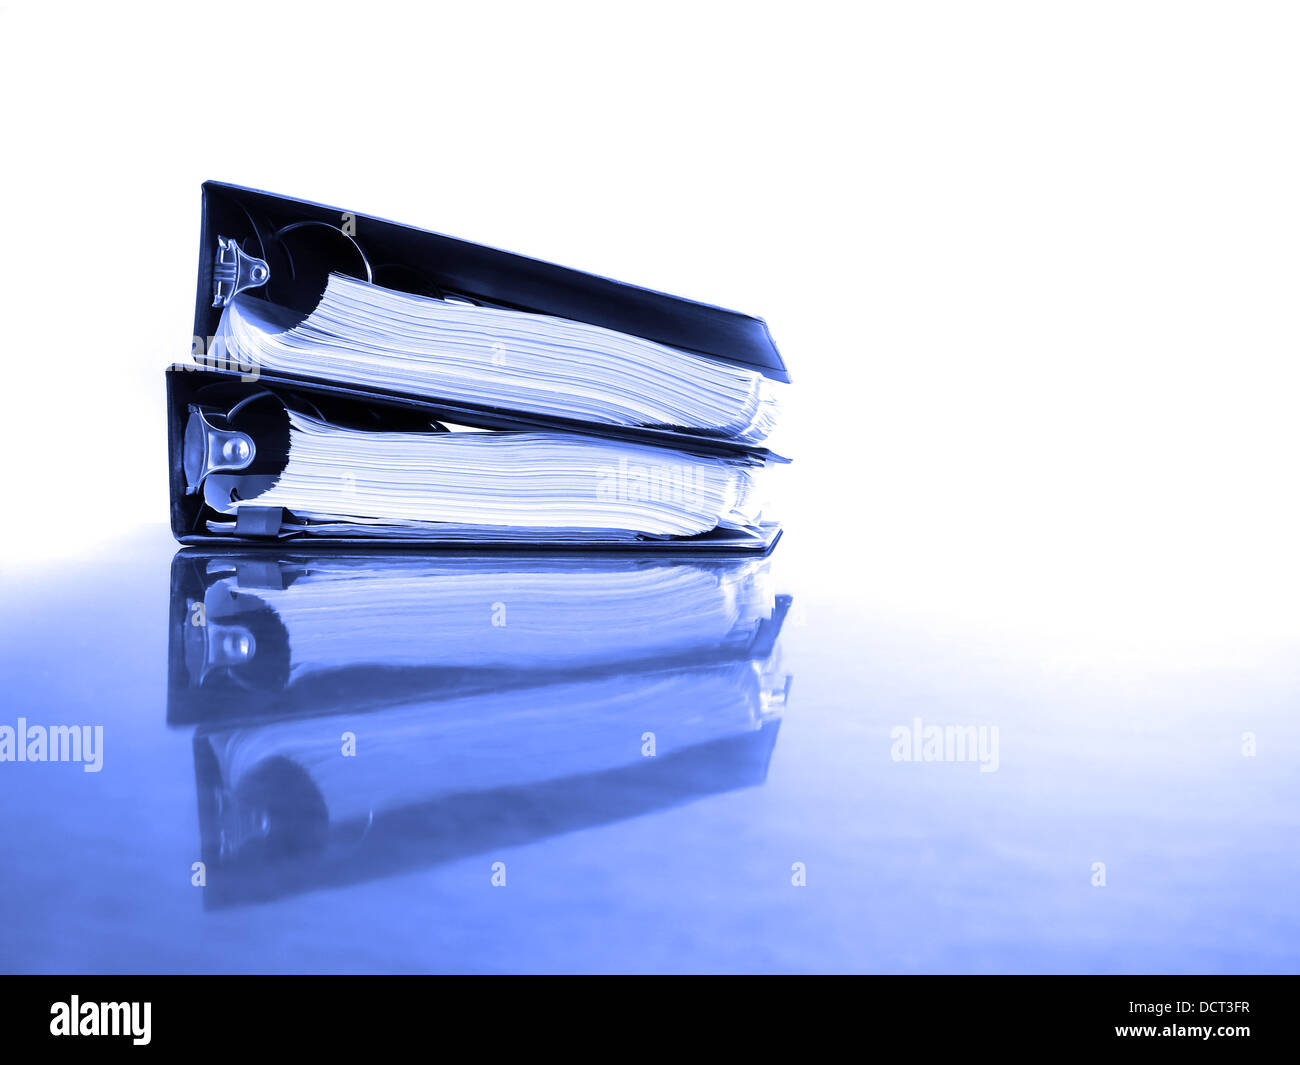 Office desk with business binders full of papers Stock Photo